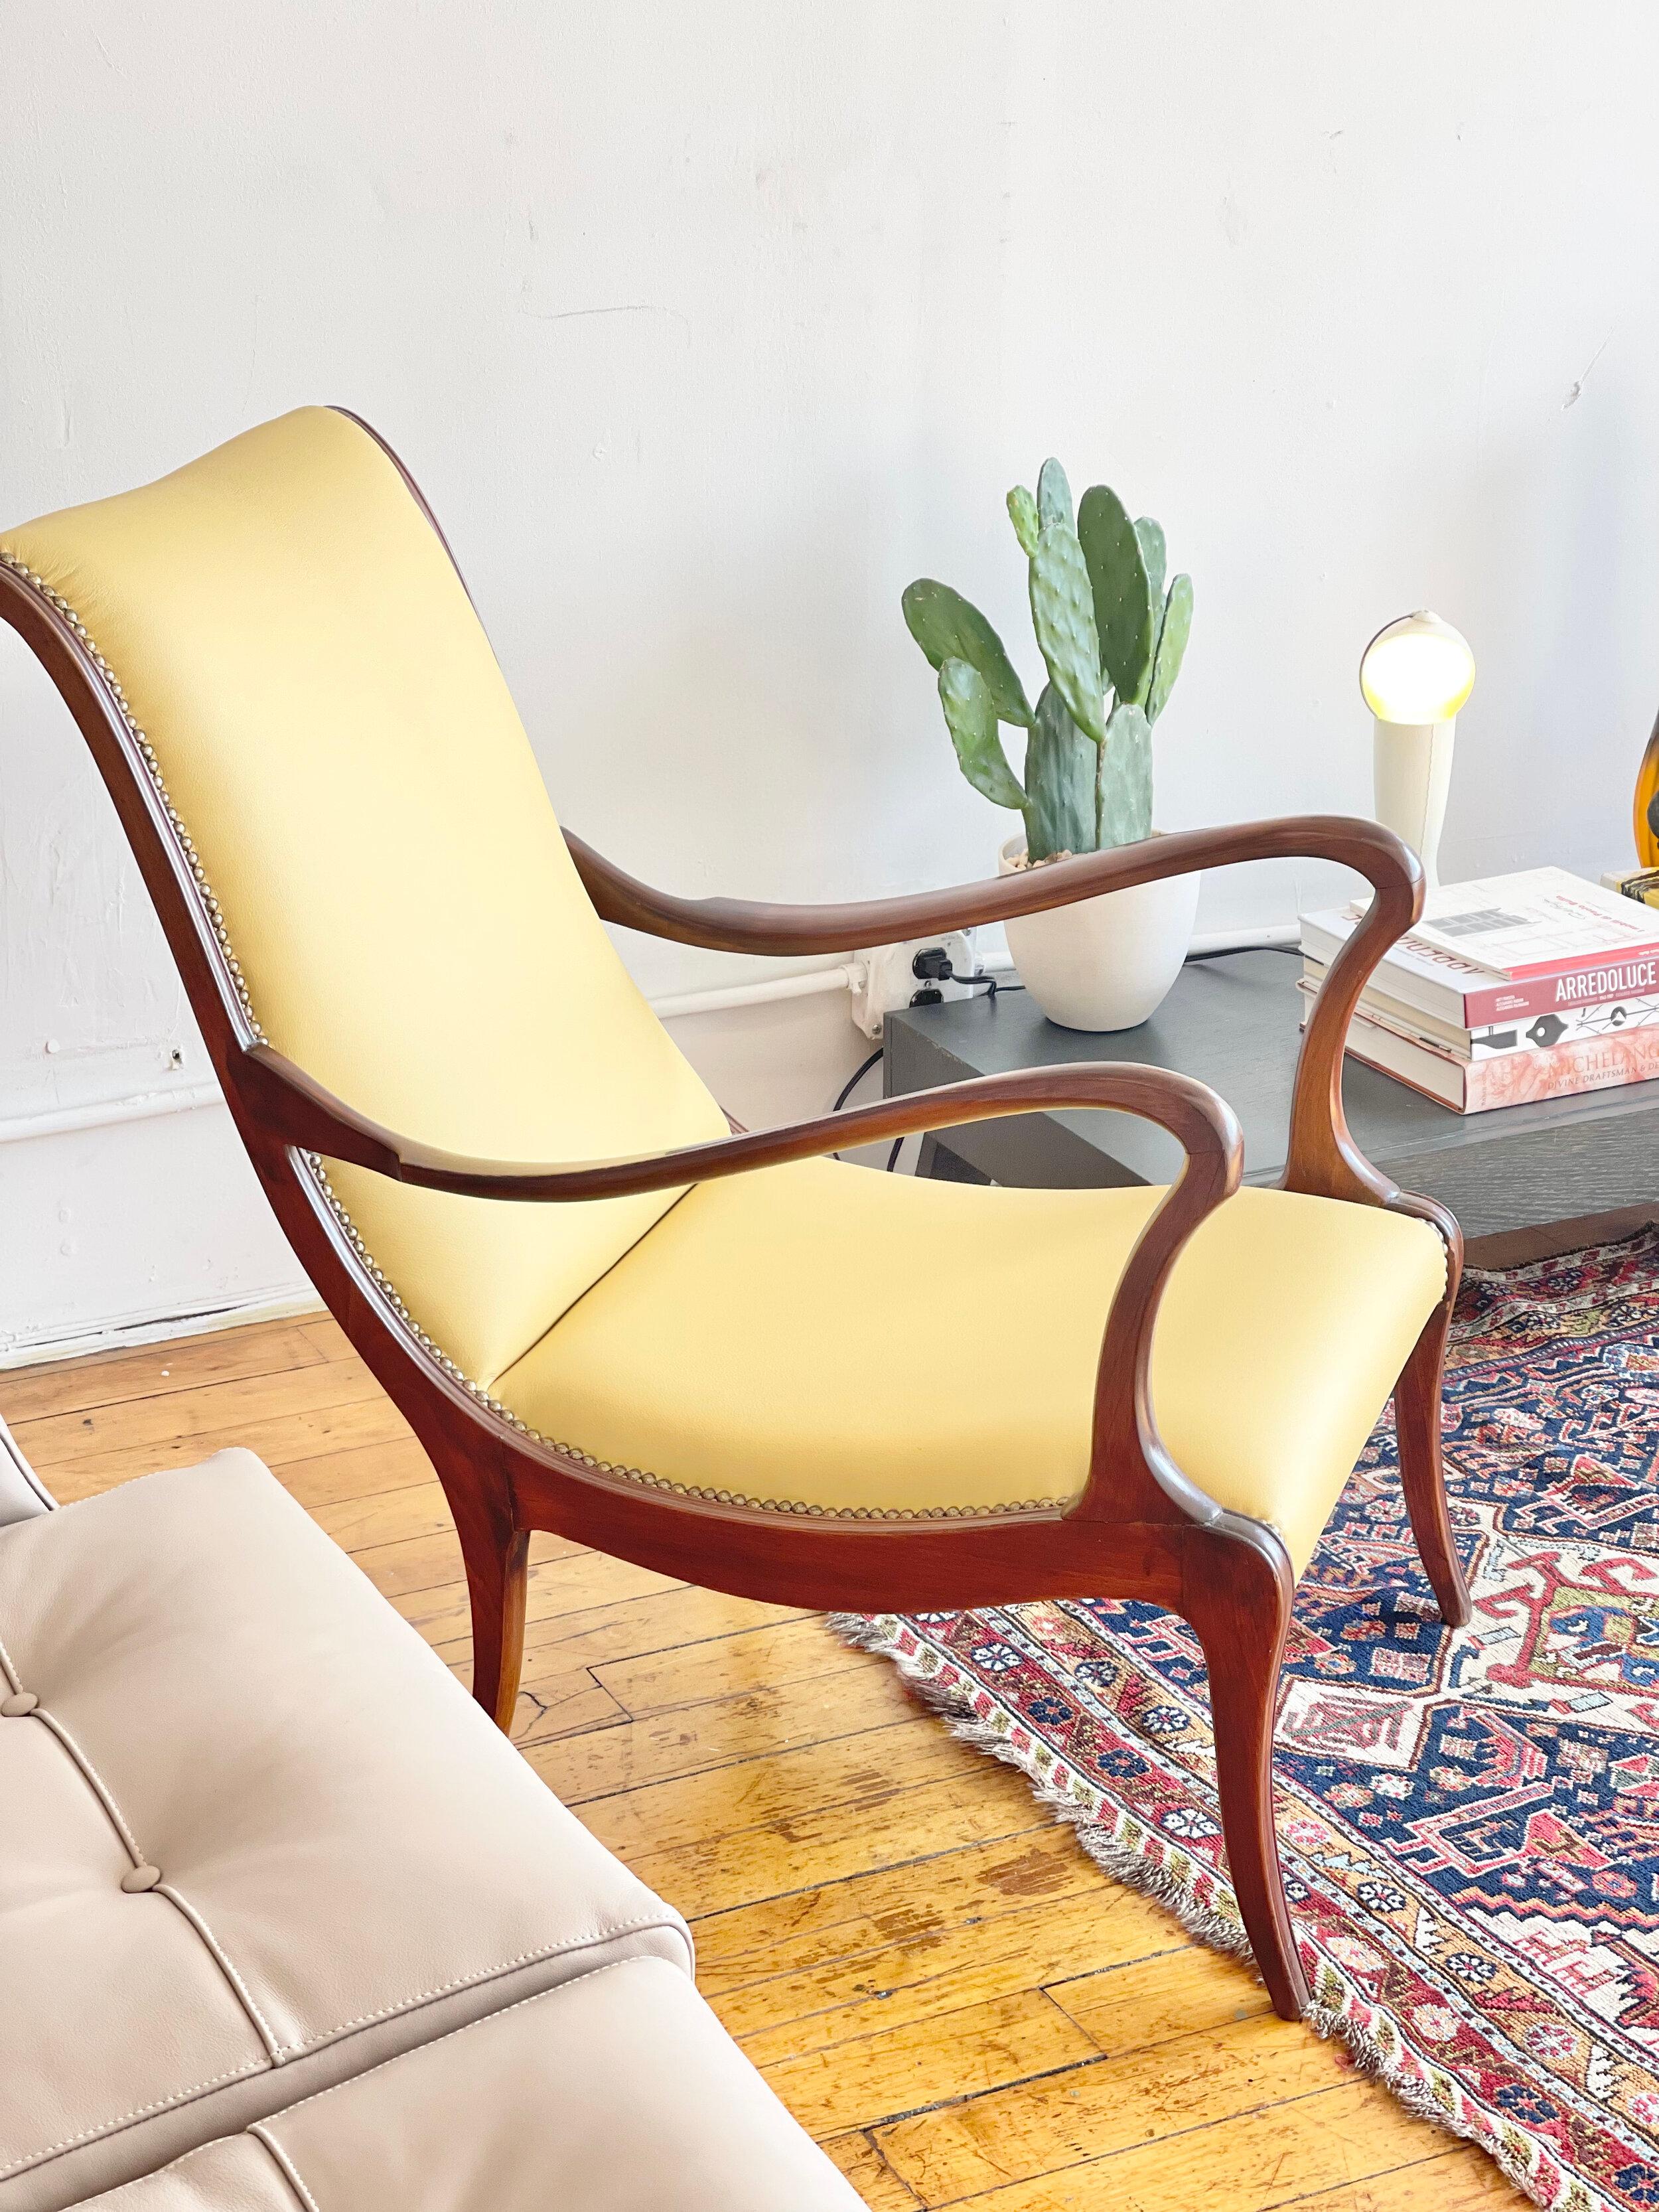 Discover the allure of these exquisite 1950s Italian Vintage Lounge Chairs, sourced directly from Italy and meticulously restored to their former glory by our expert Italian upholsterers. Immerse yourself in the charm of mid-century design, as these